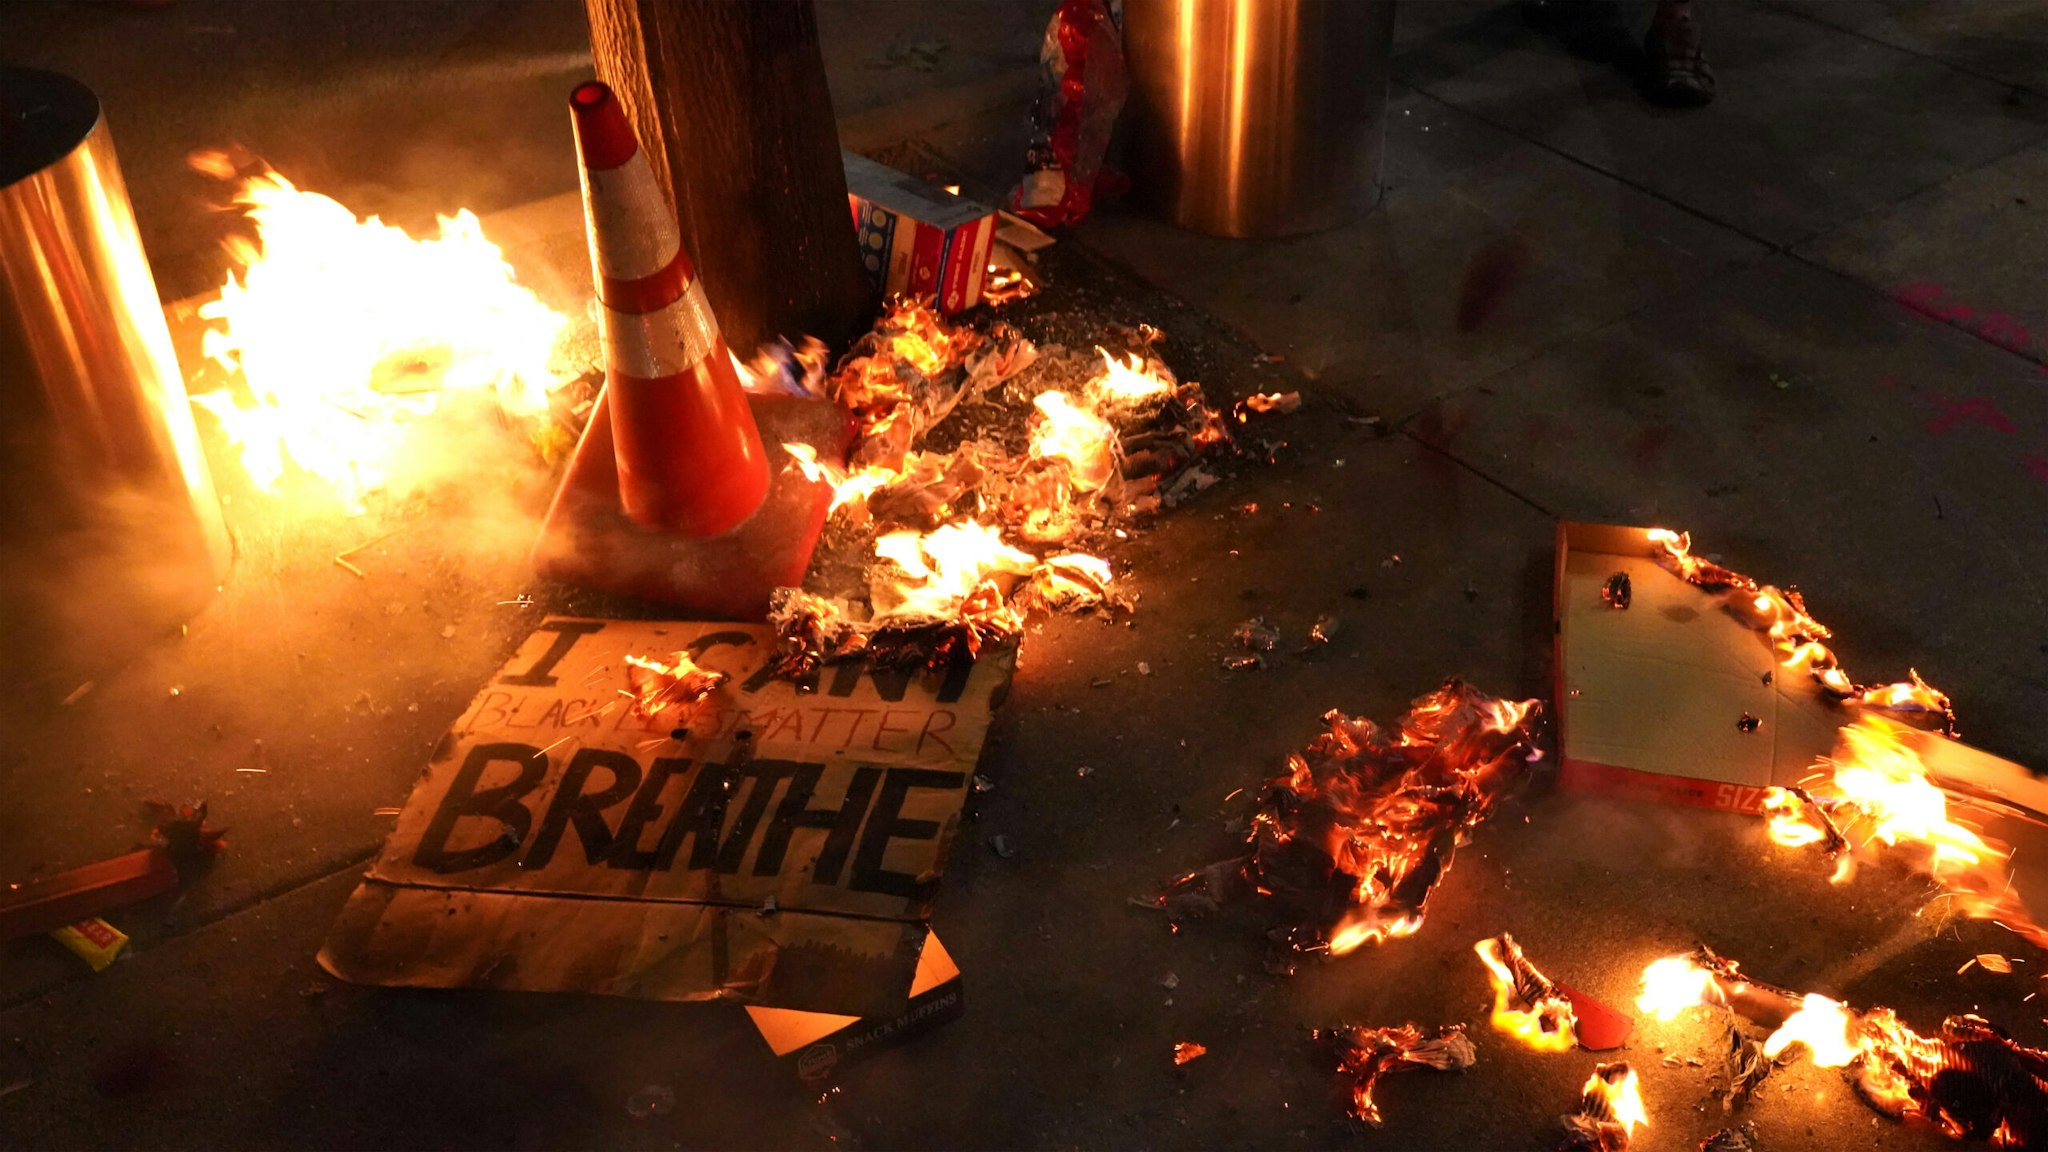 PORTLAND, OR - JULY 20: A fire burns around a sign reading I cant breathe during a protest in front of the Mark O. Hatfield U.S. Courthouse on July 201, 2020 in Portland, Oregon. Monday night marked 54 days of protests in Portland following the death of George Floyd in police custody.